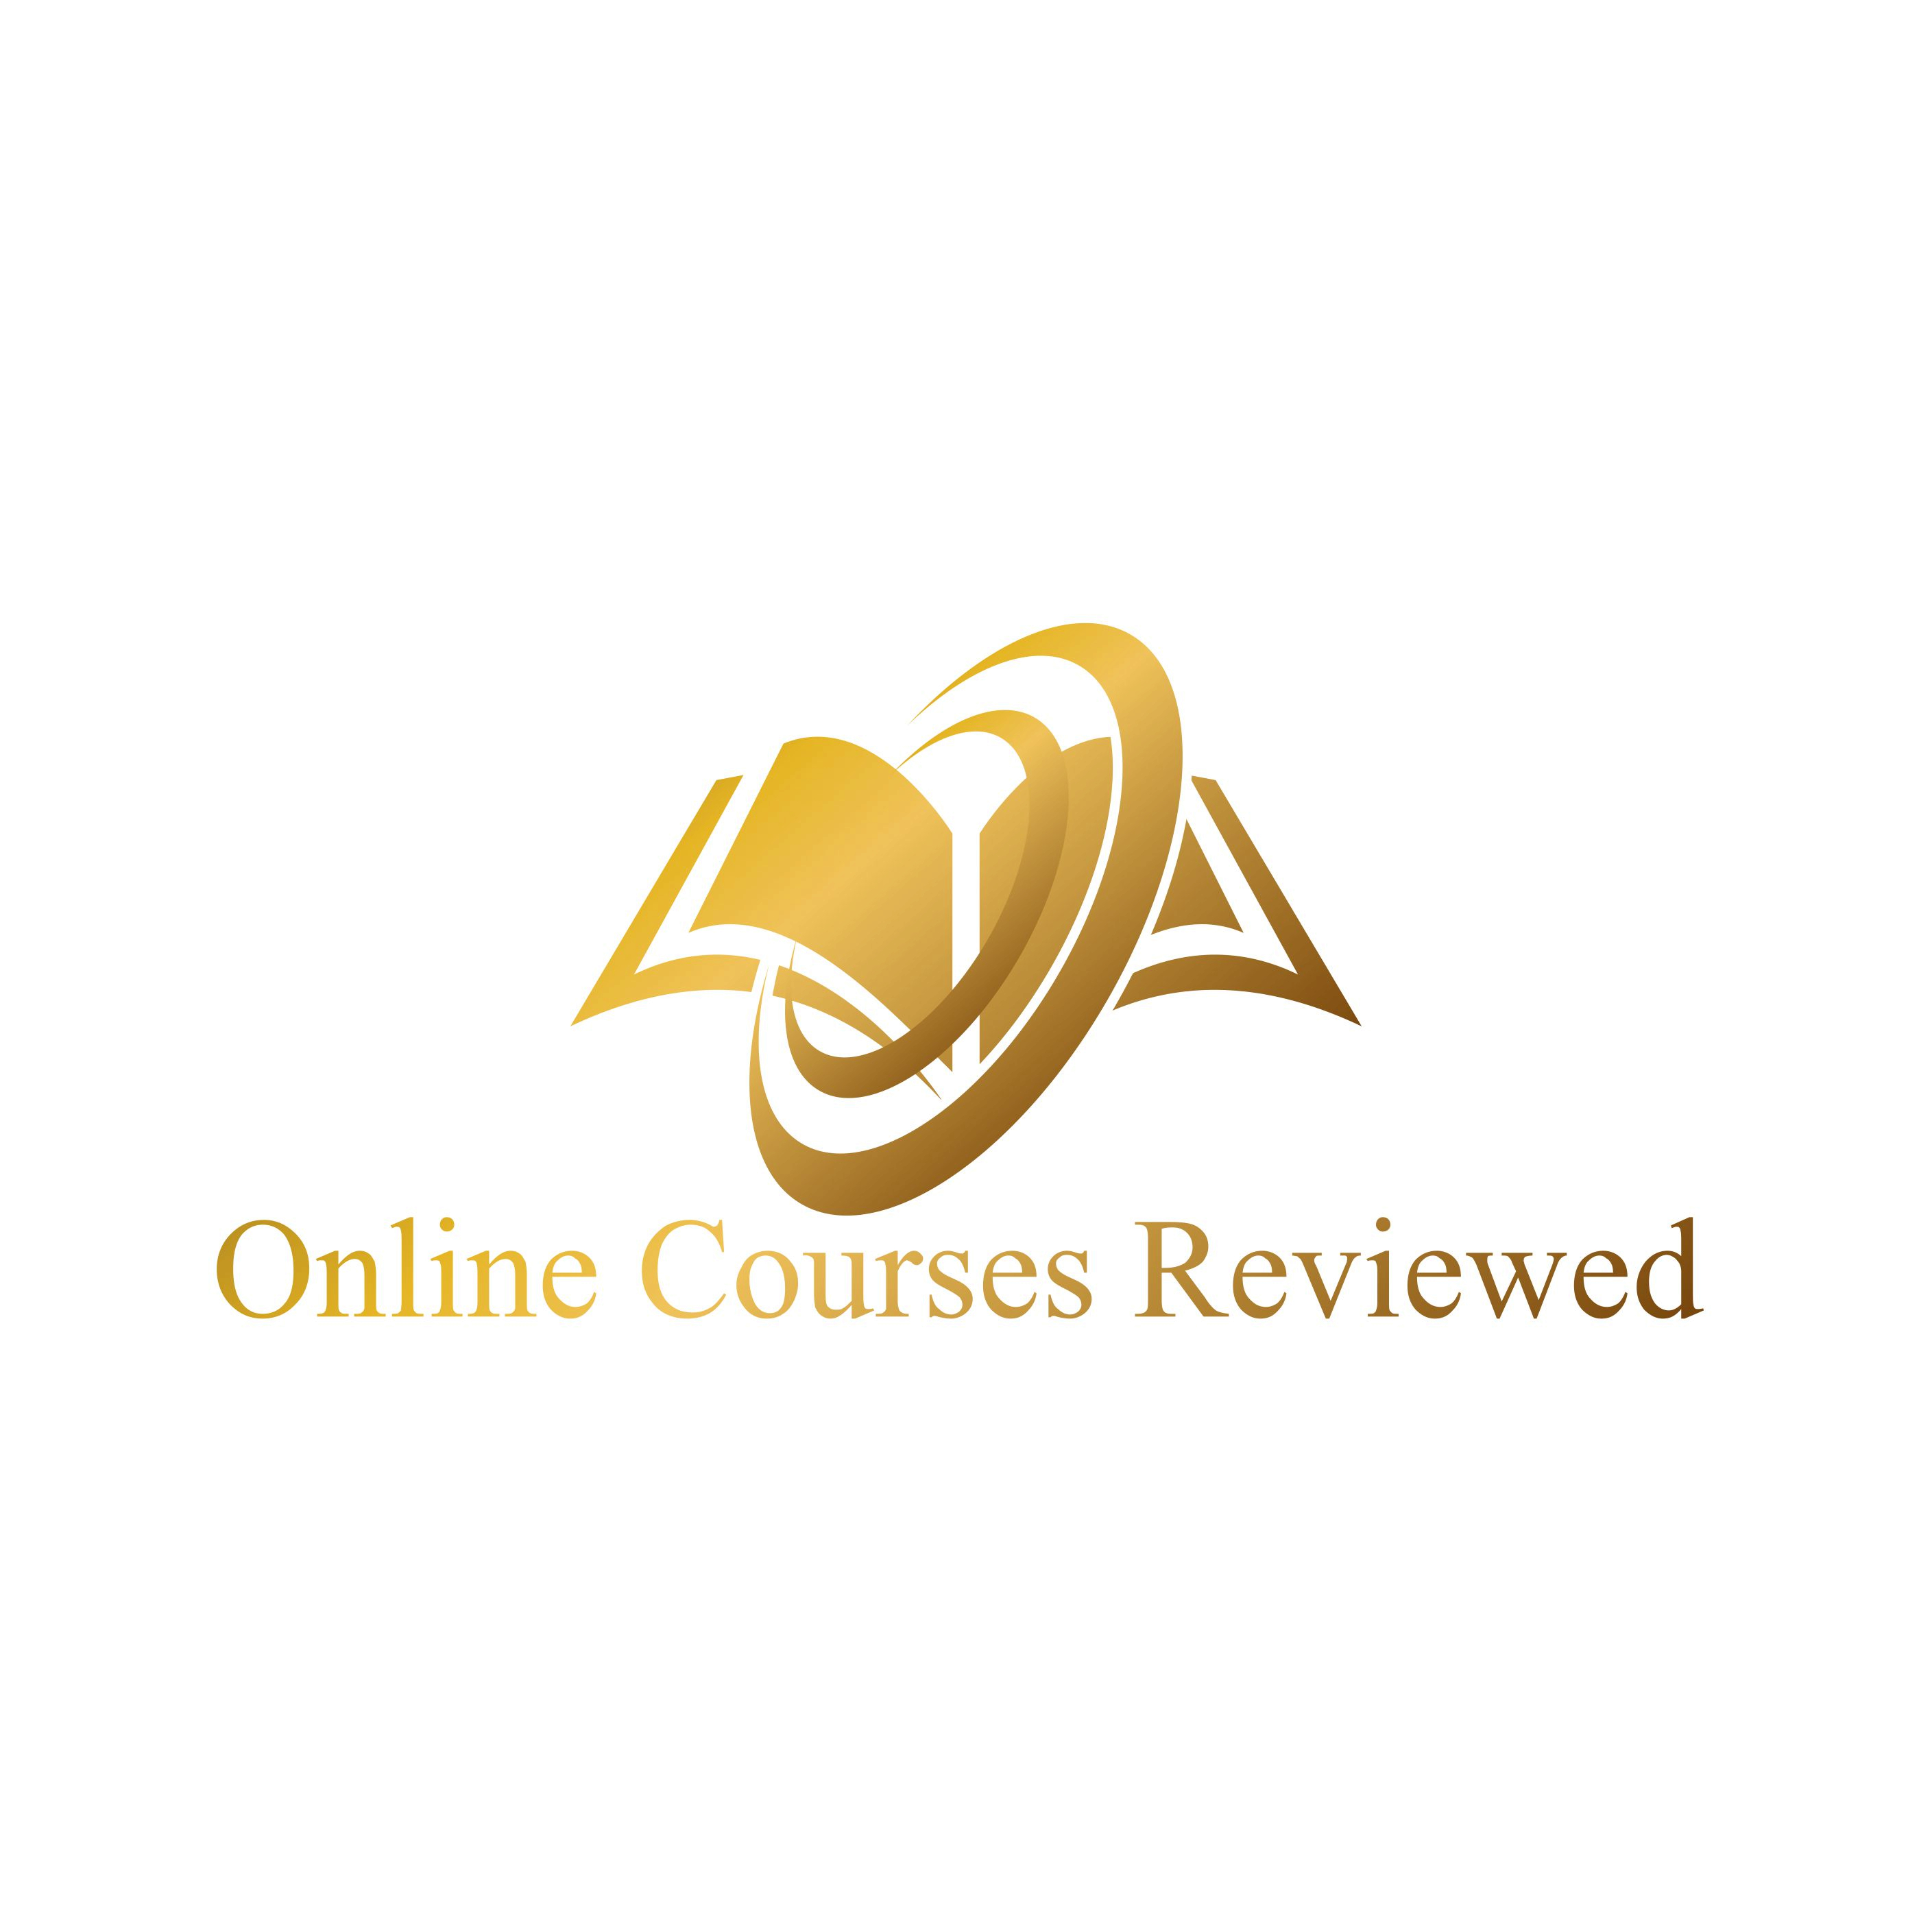 Online Courses Reviewed